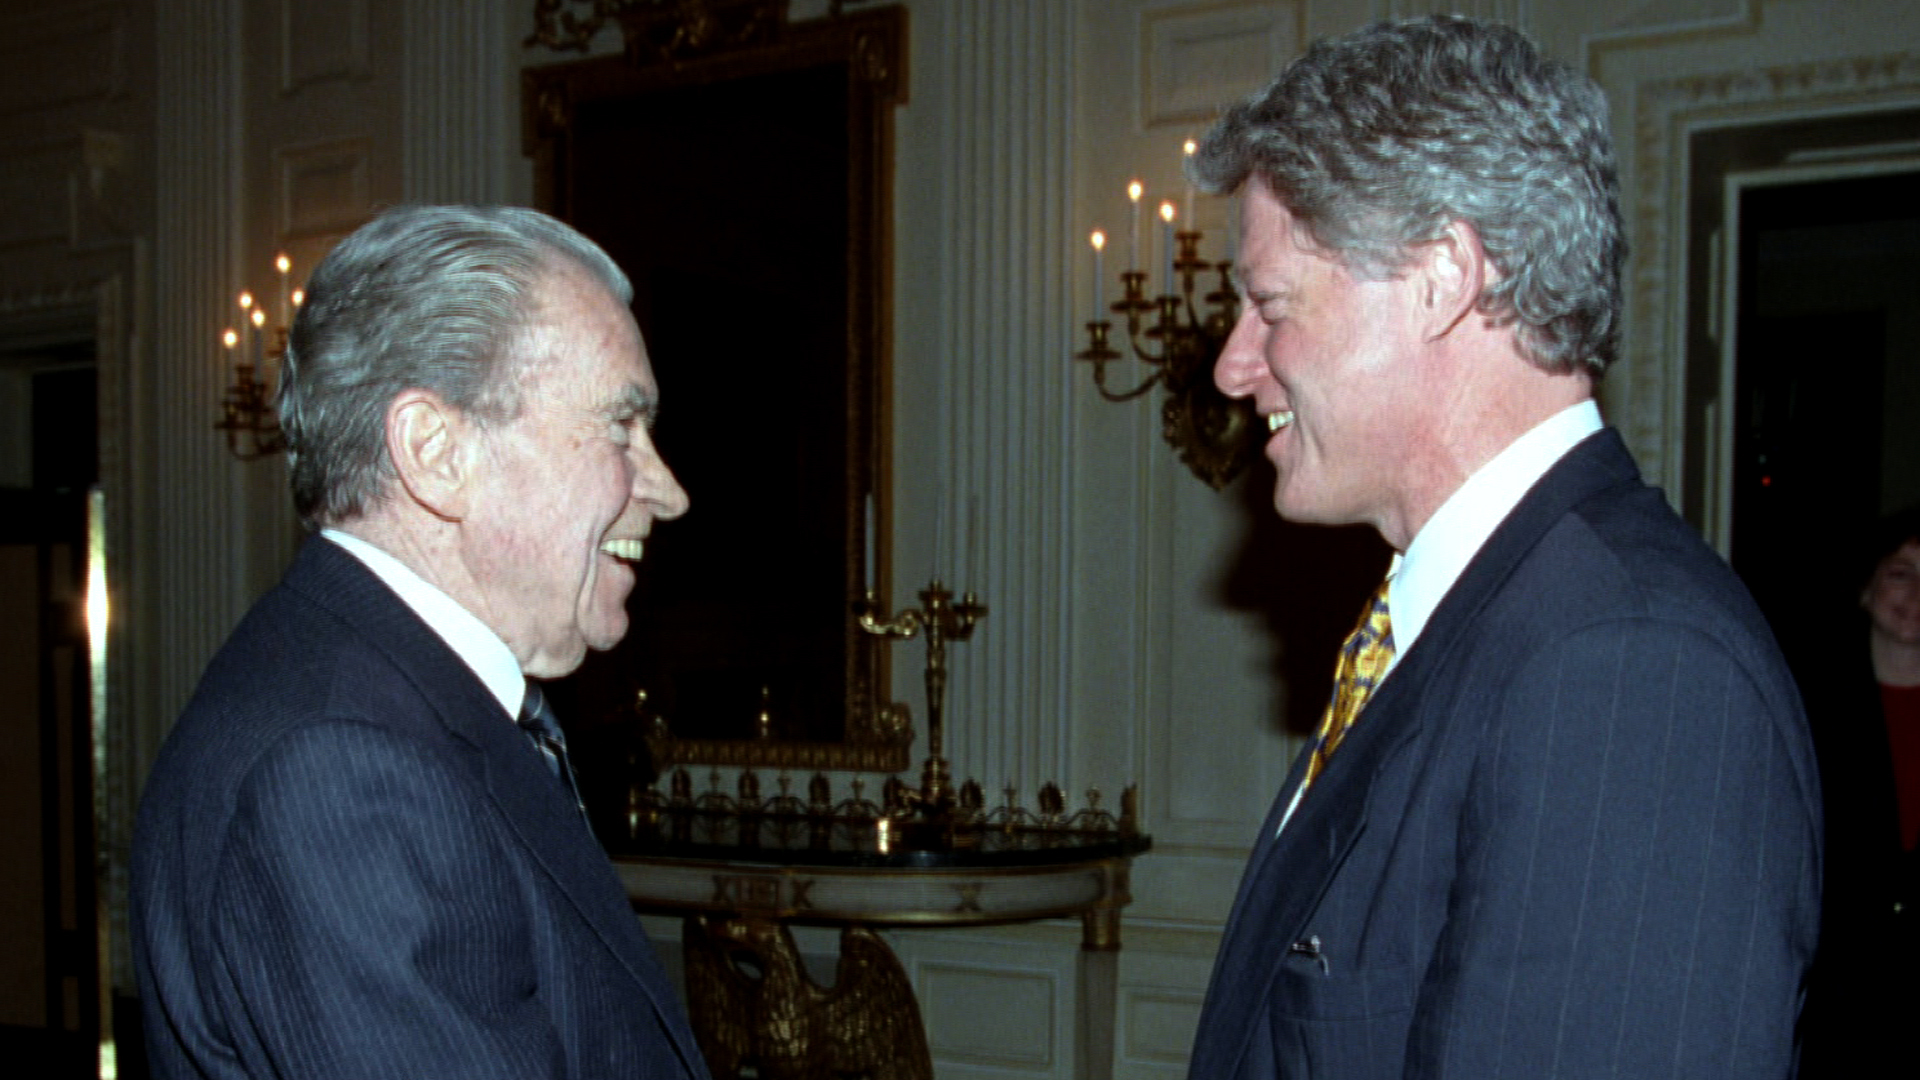 Letters reveal friendship between Presidents and Nixon - CBS News